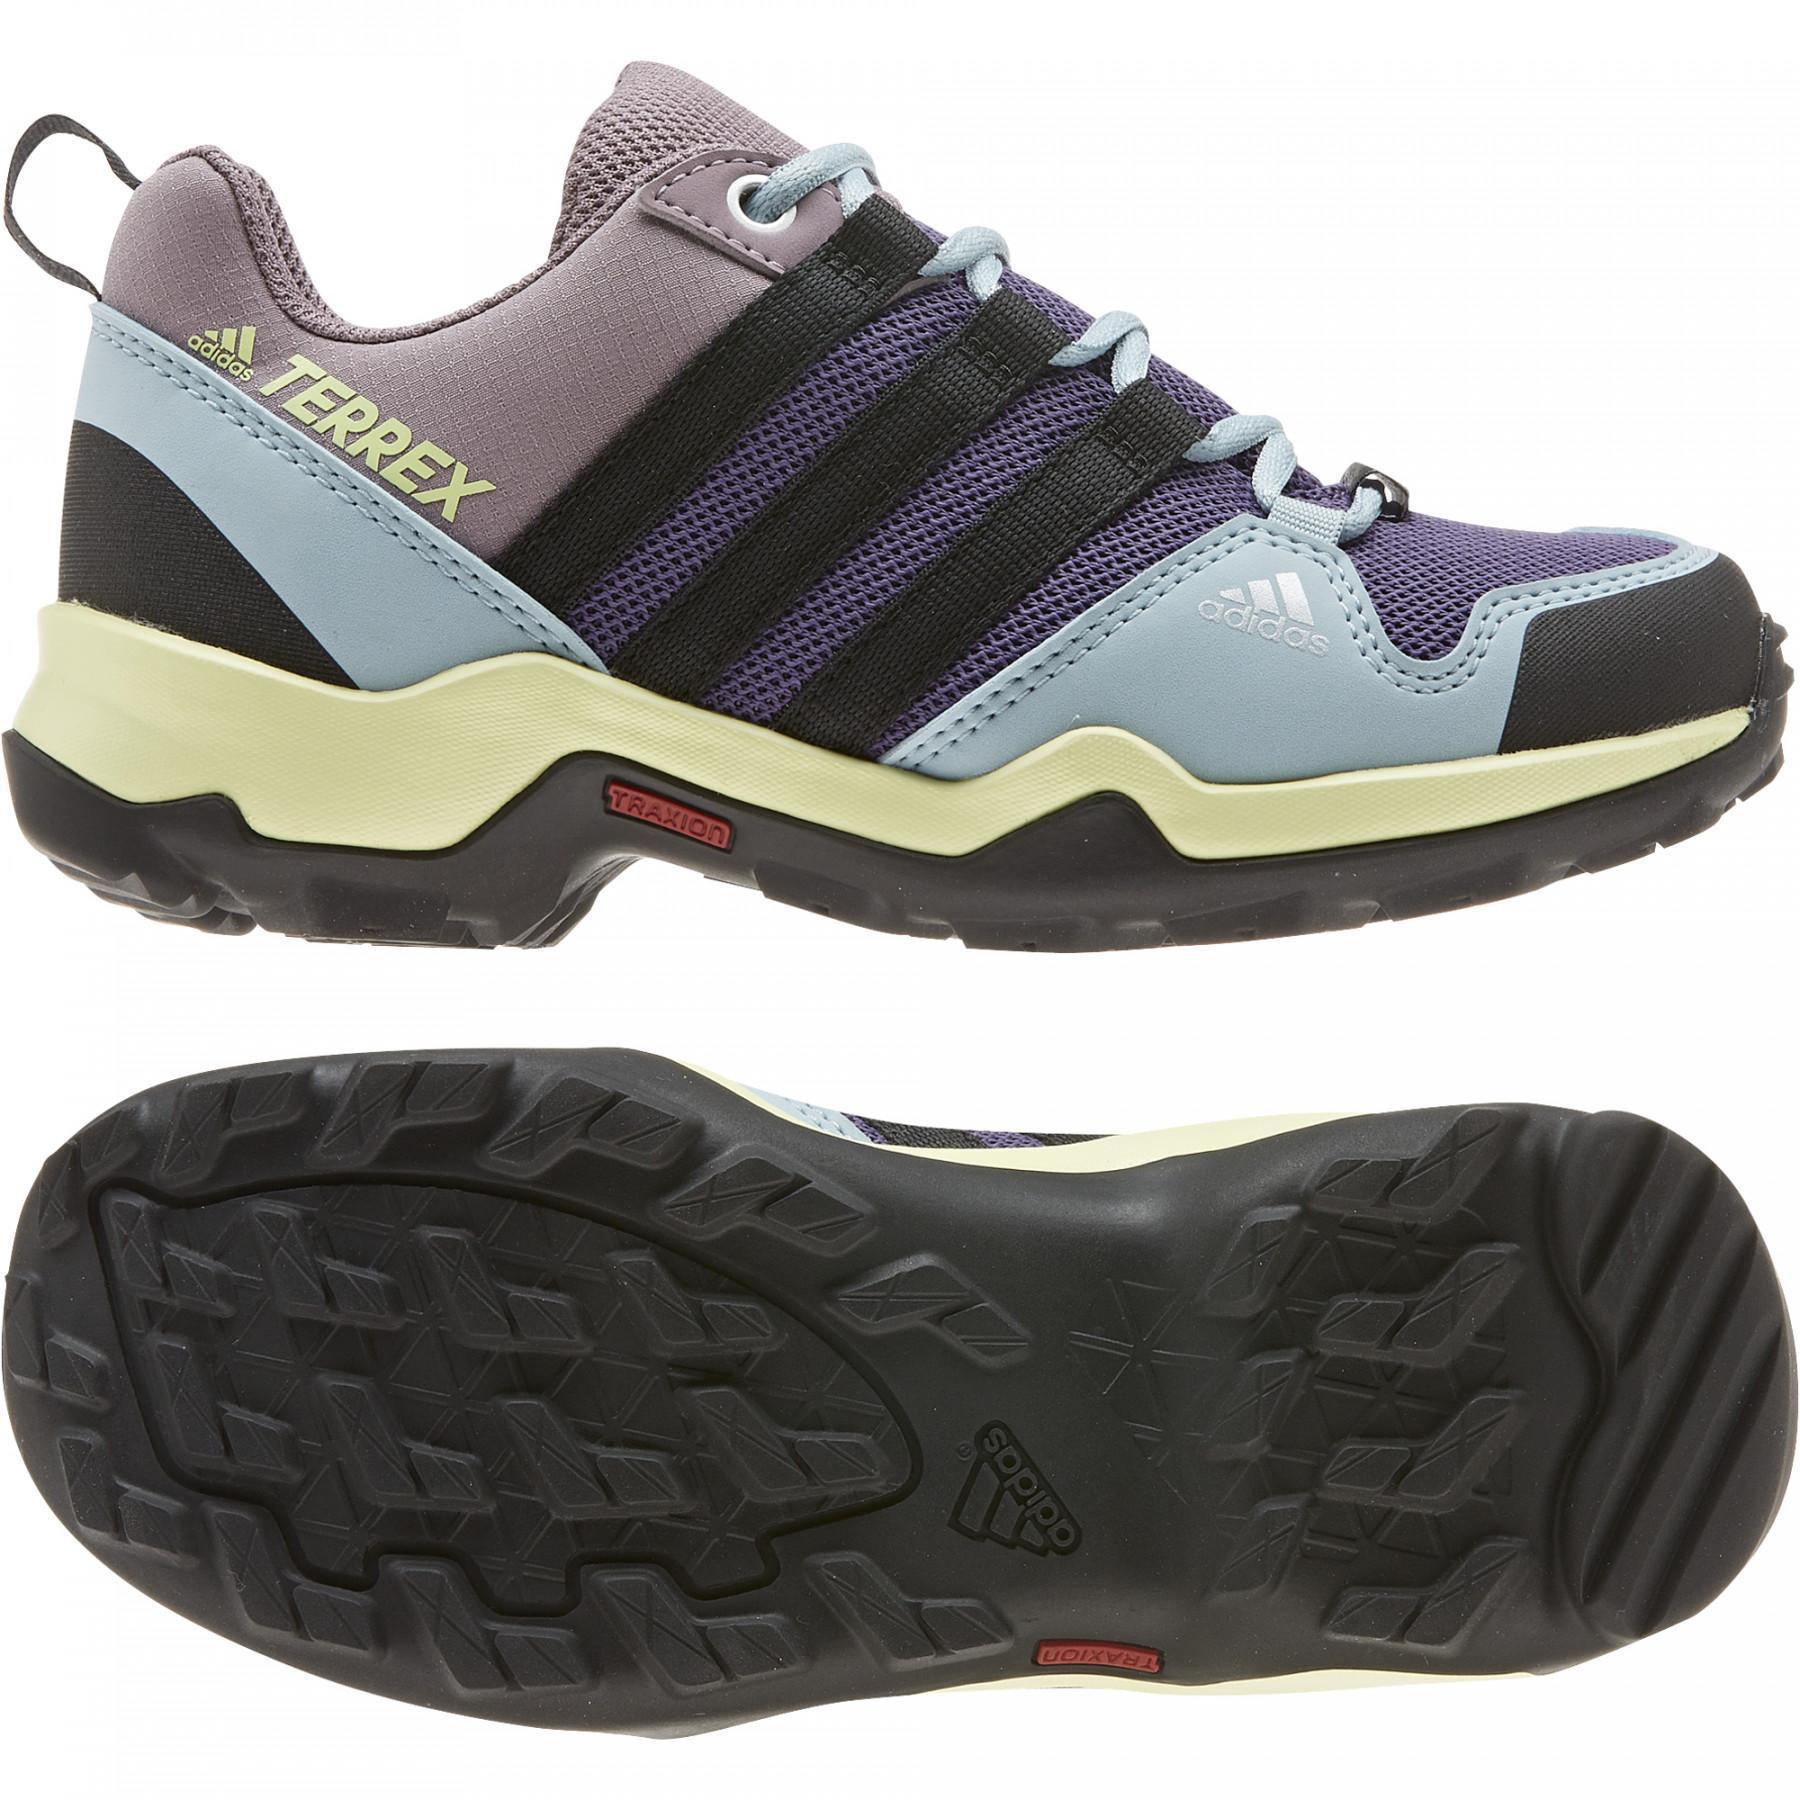 Children's shoes adidas AX2R ClimaProof